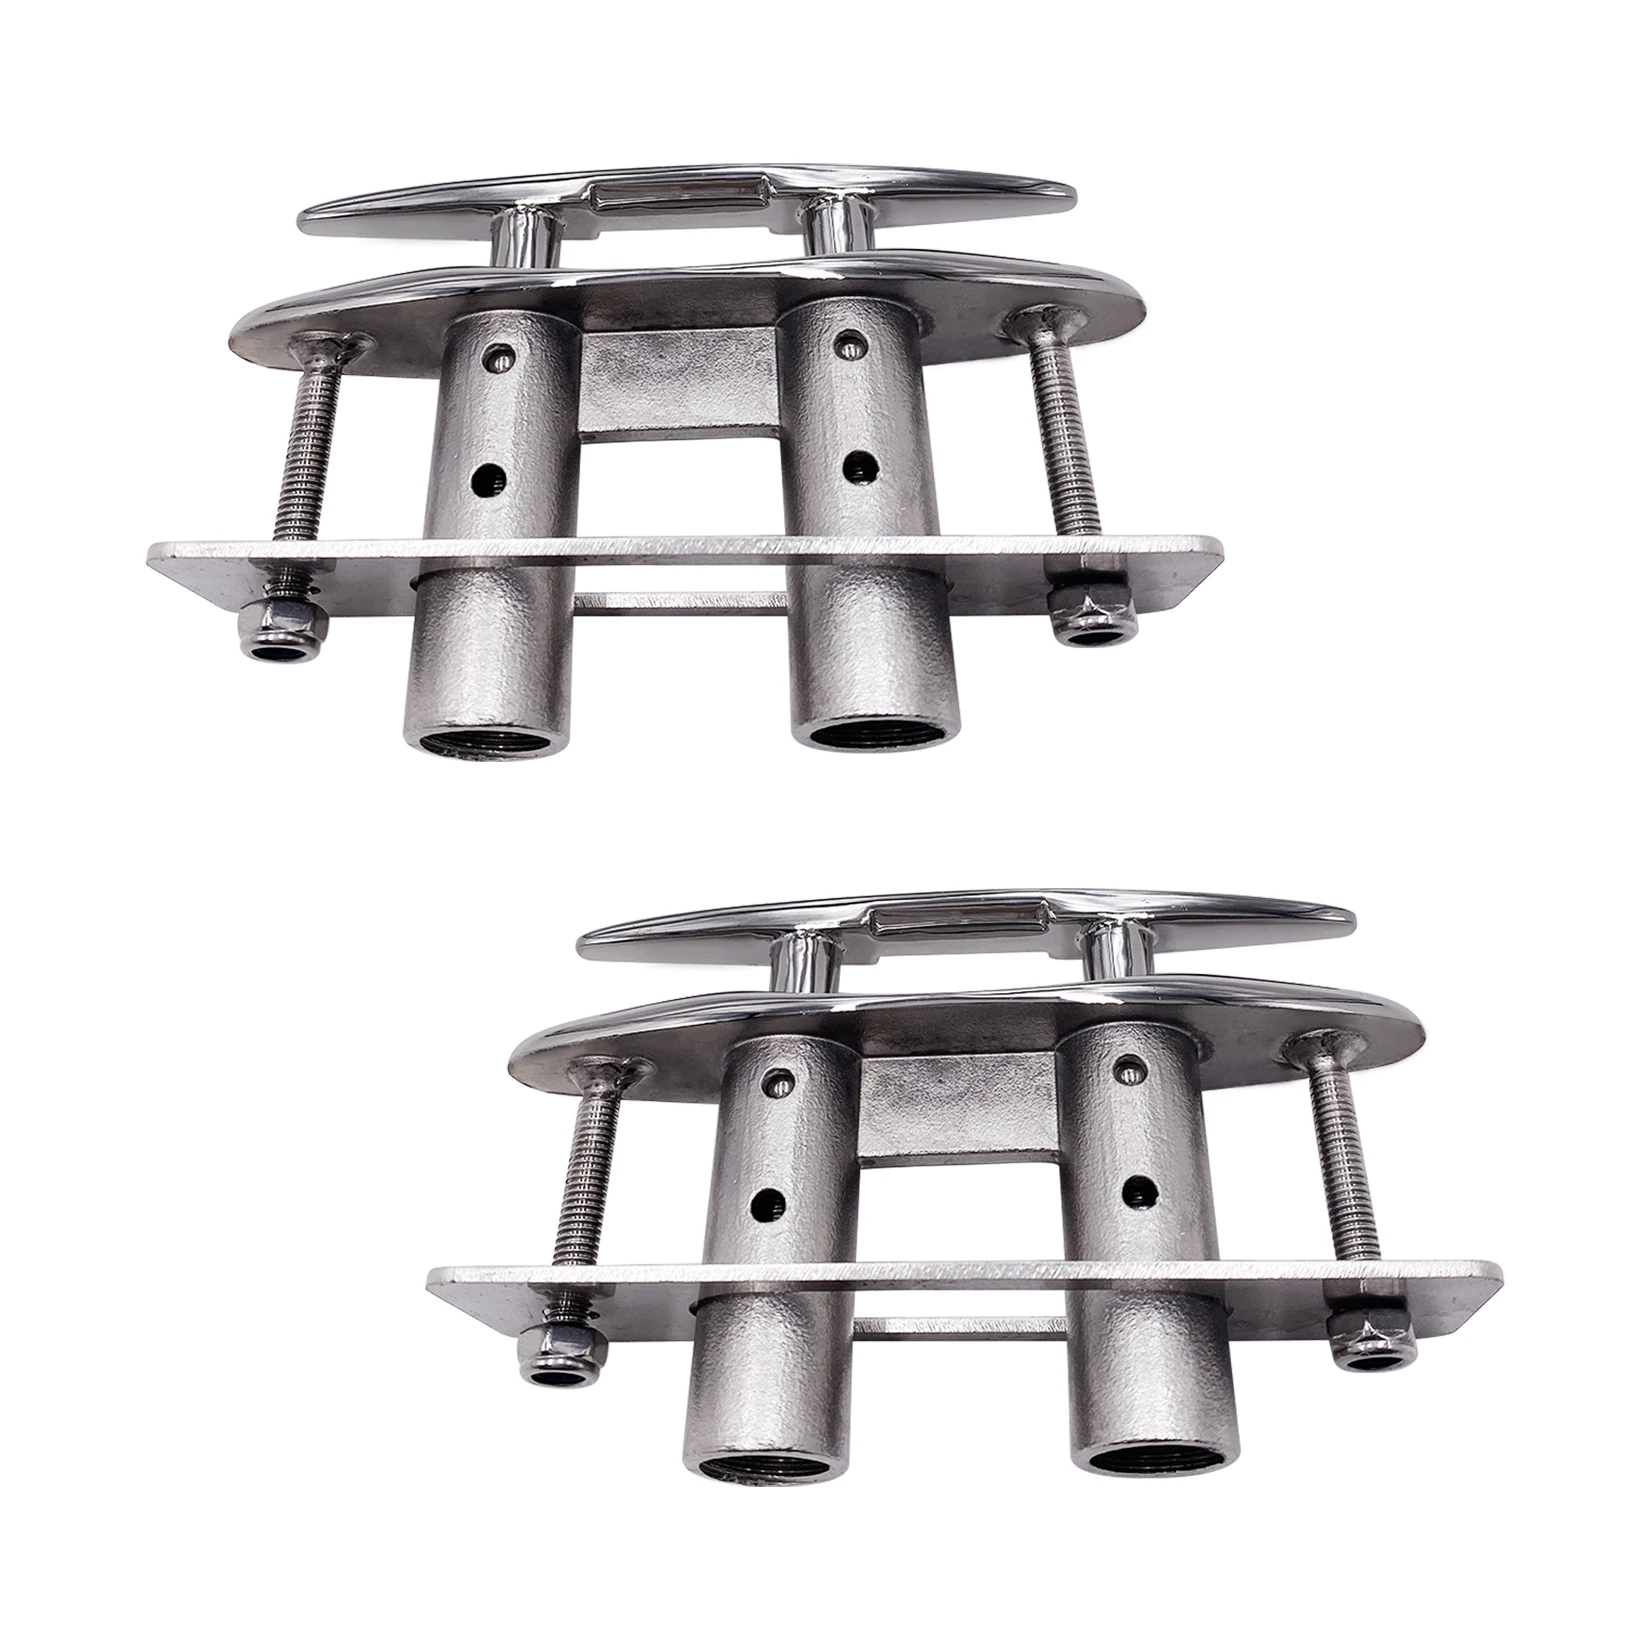 2 Pcs 5 inch Boat Pull Up Flush Mount Dock Cleat Marine Docking Stainless Steel 316 Pop Up Retractable Mooring Rope Cleat